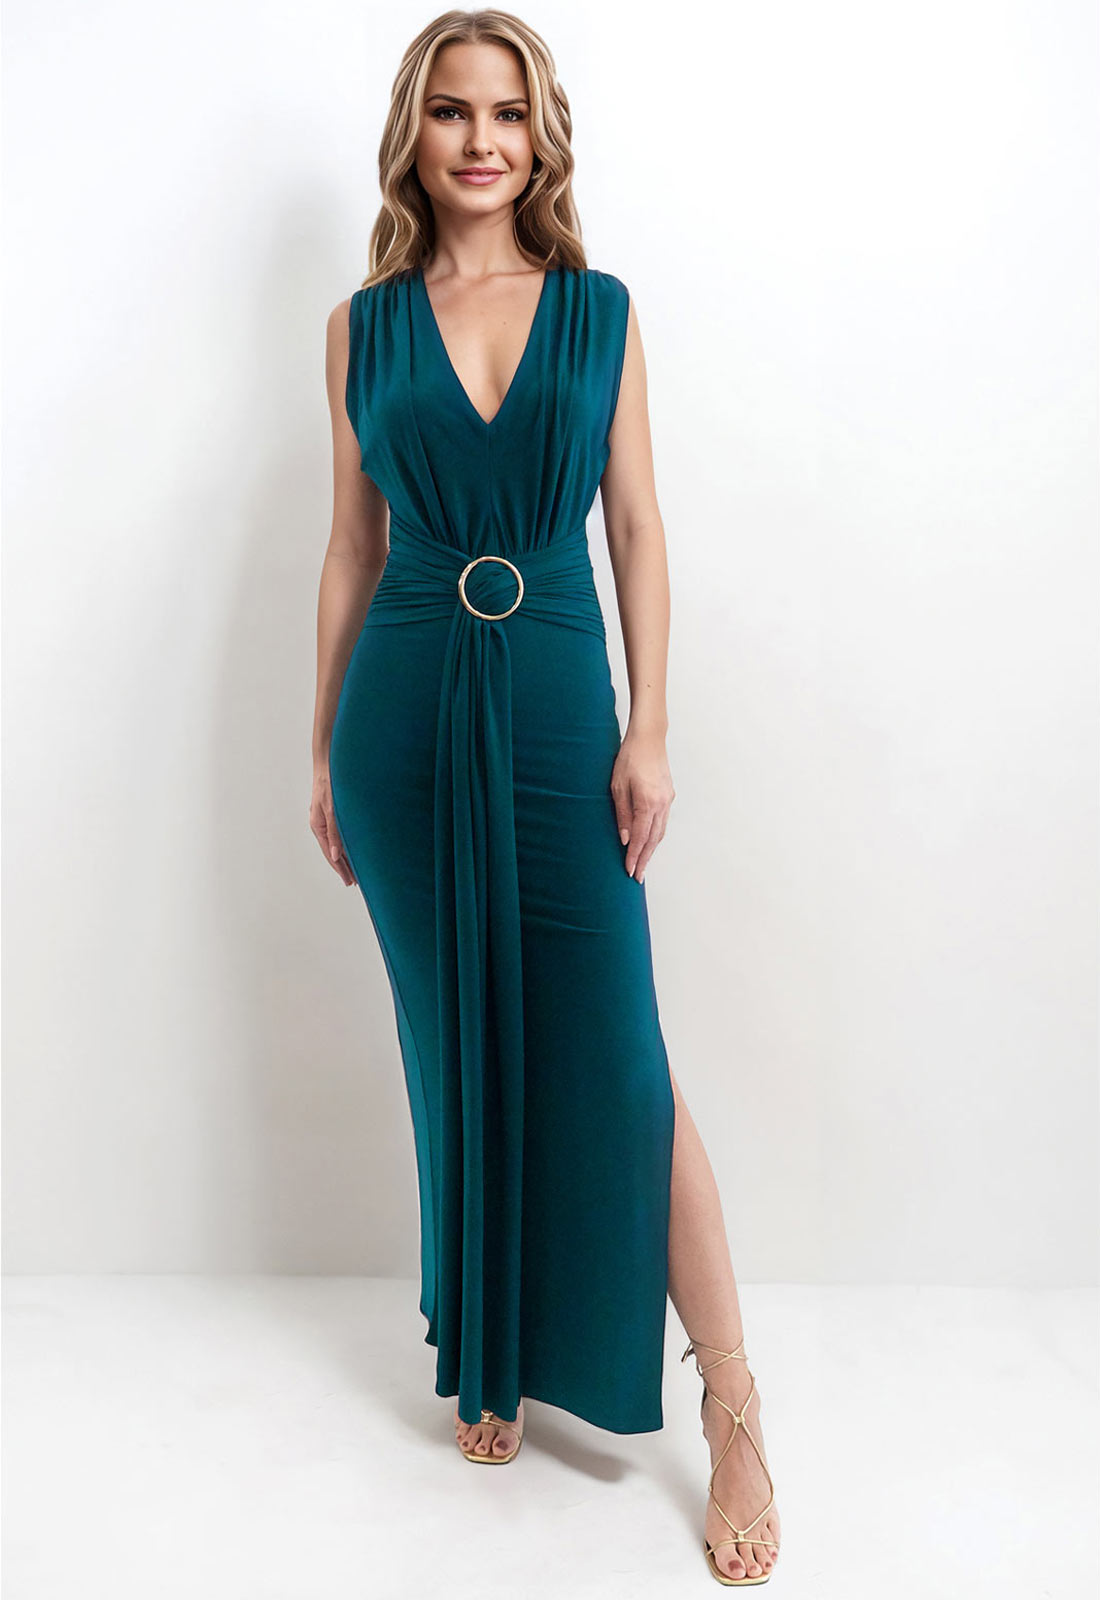 Honor Gold Green Amor Plunge Front Maxi Dress